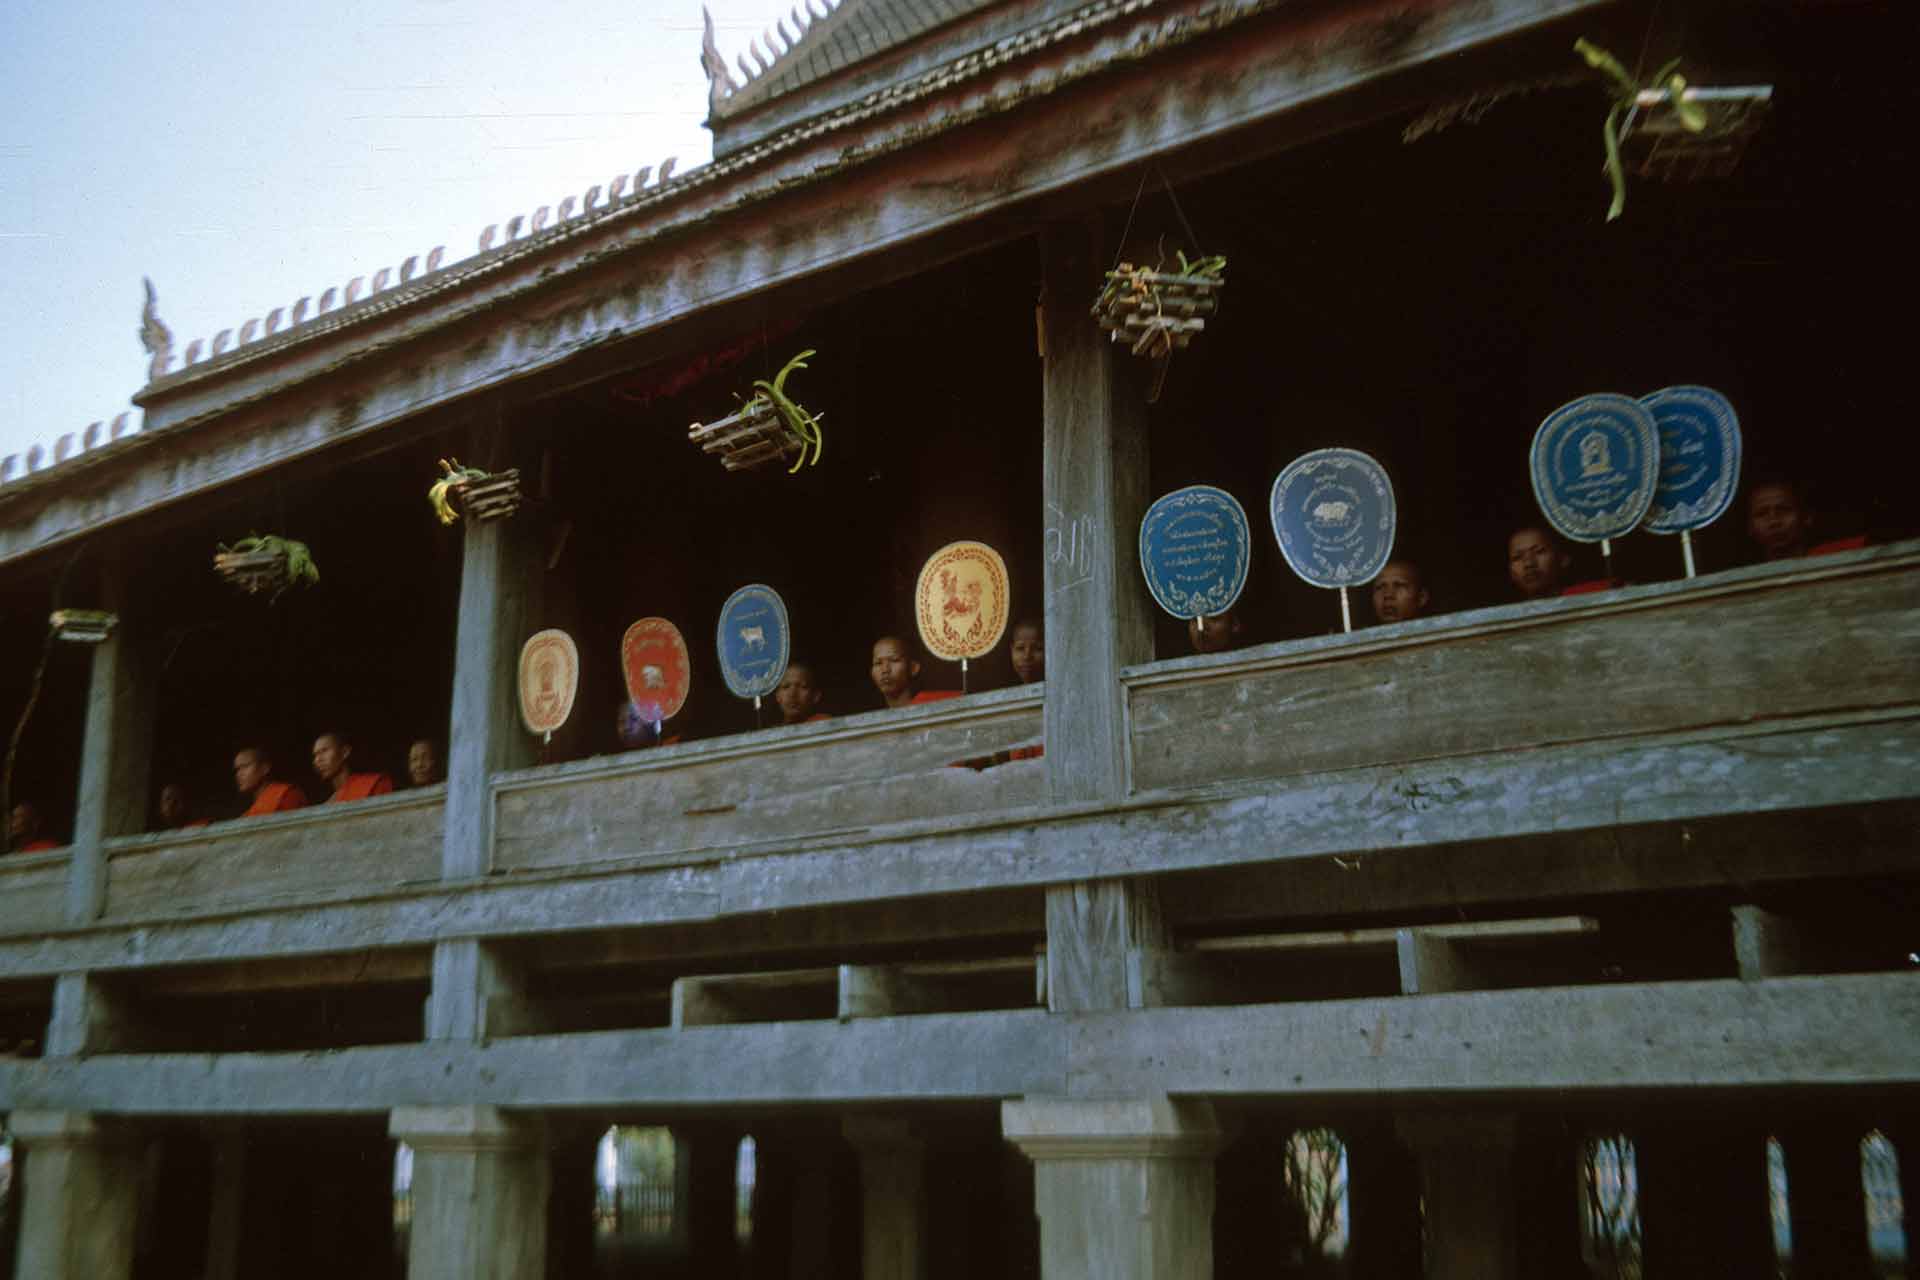 many monks holding ceremonial fan on balcony of building